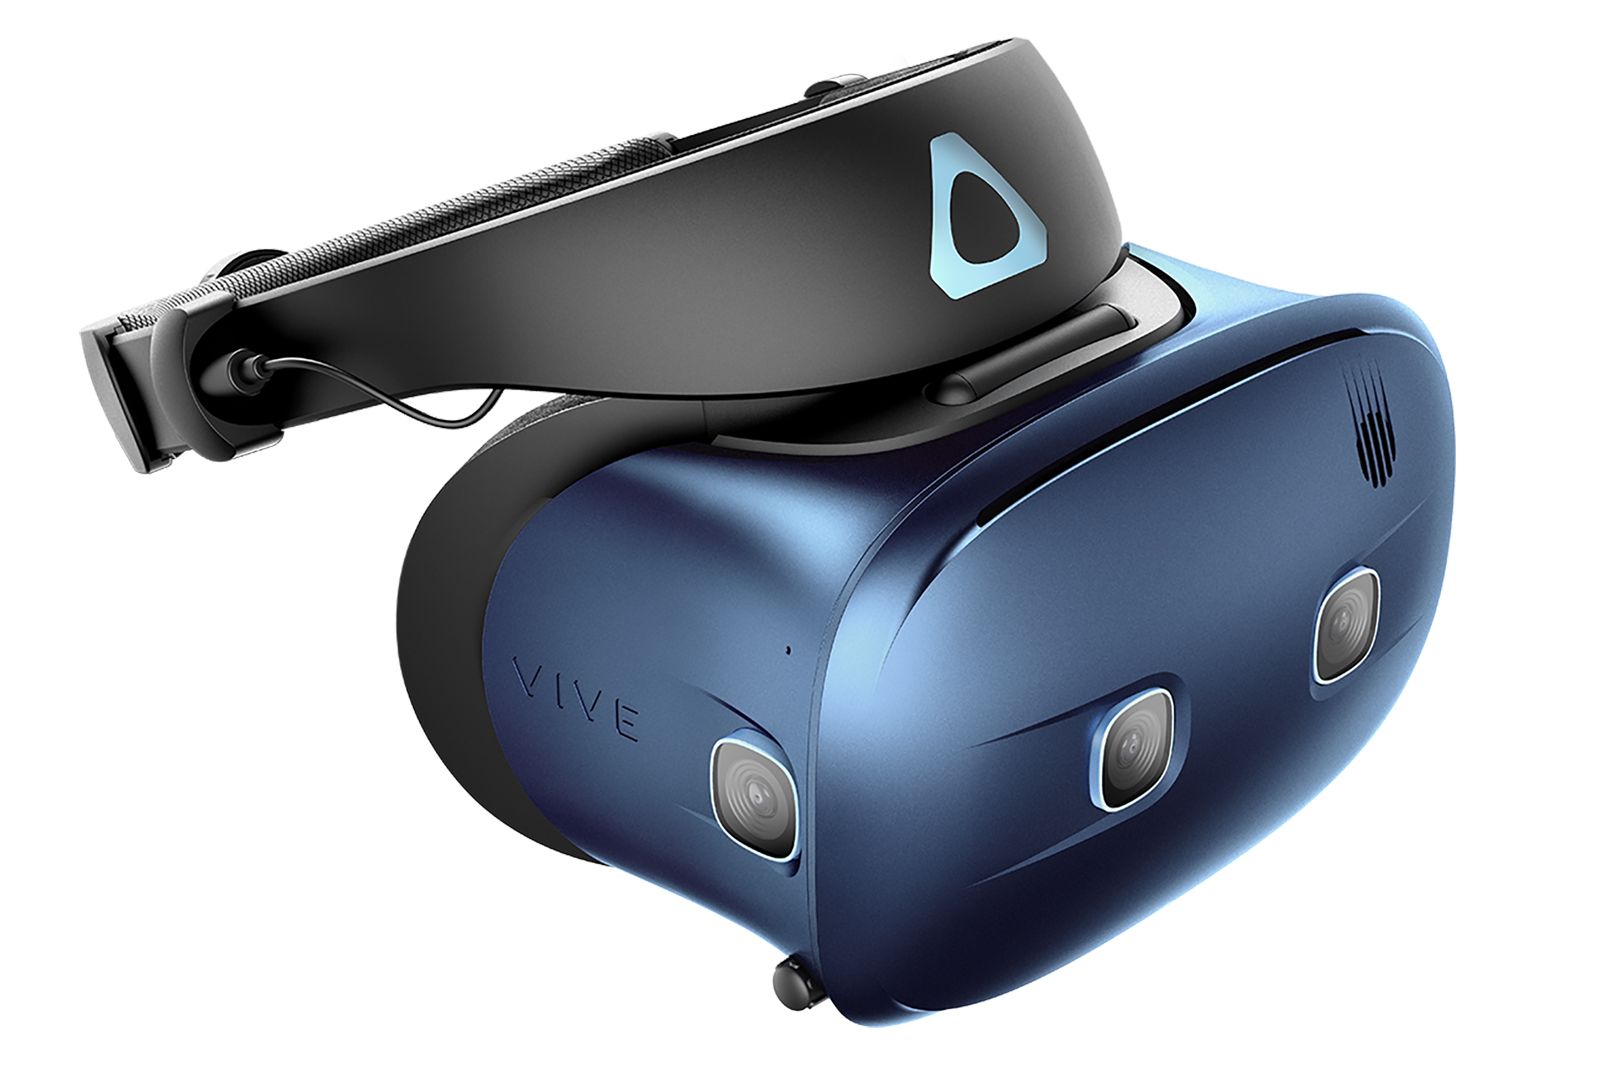 Htc Vive Cosmos Play Cosmos Elite And Cosmos Xr Headsets Added To Vr Range Plus Faceplates To Upgrade image 1